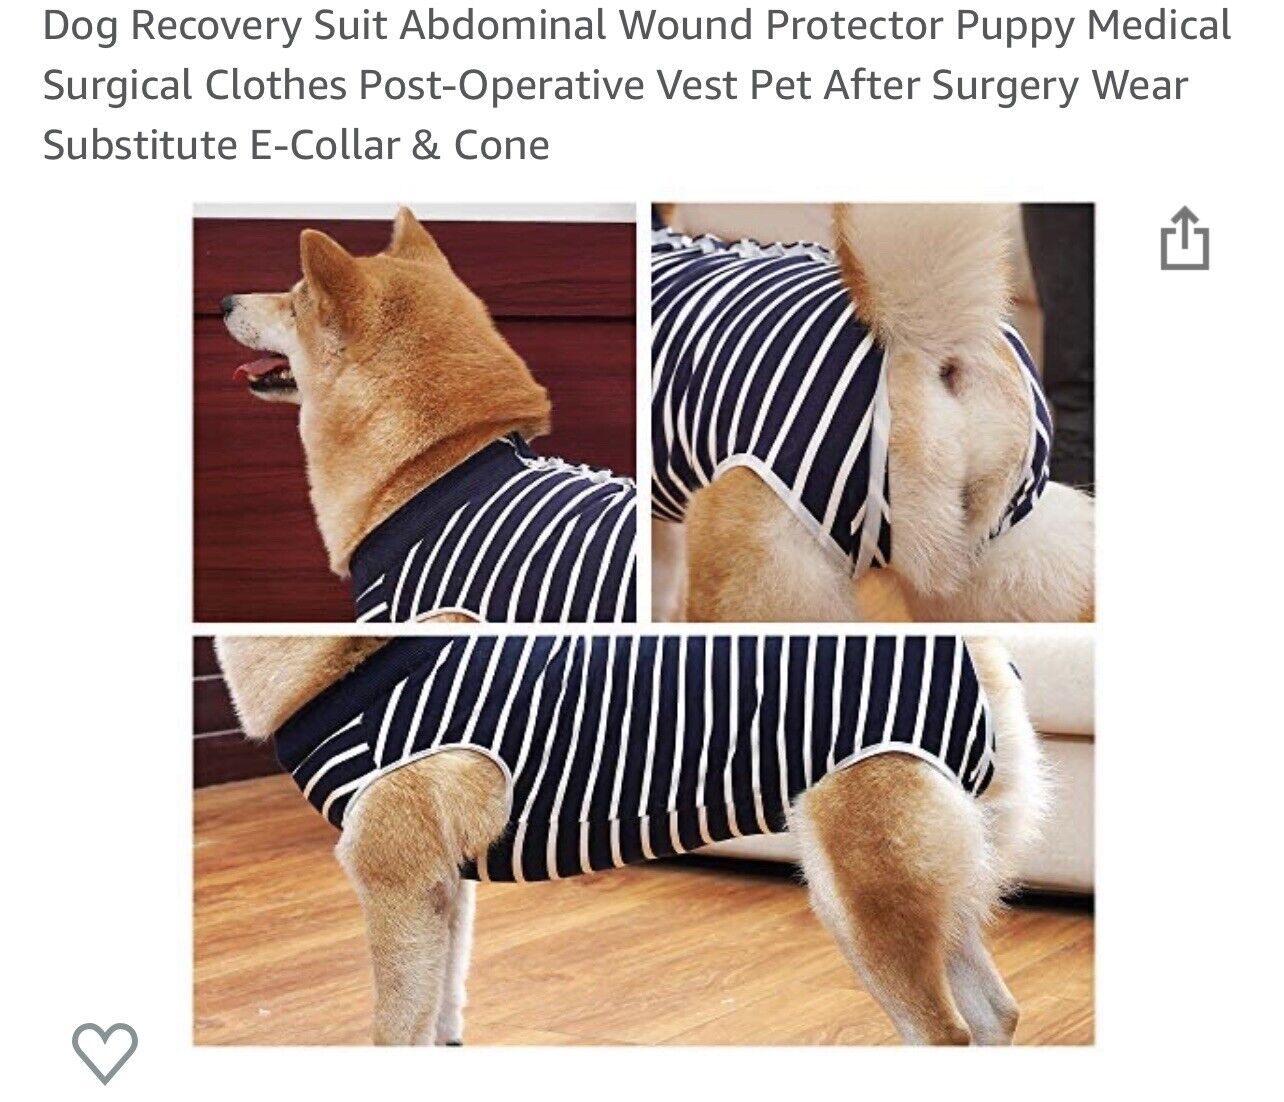 Dog Recovery Suit Abdominal Wound Protector Puppy Medical Surgical Large